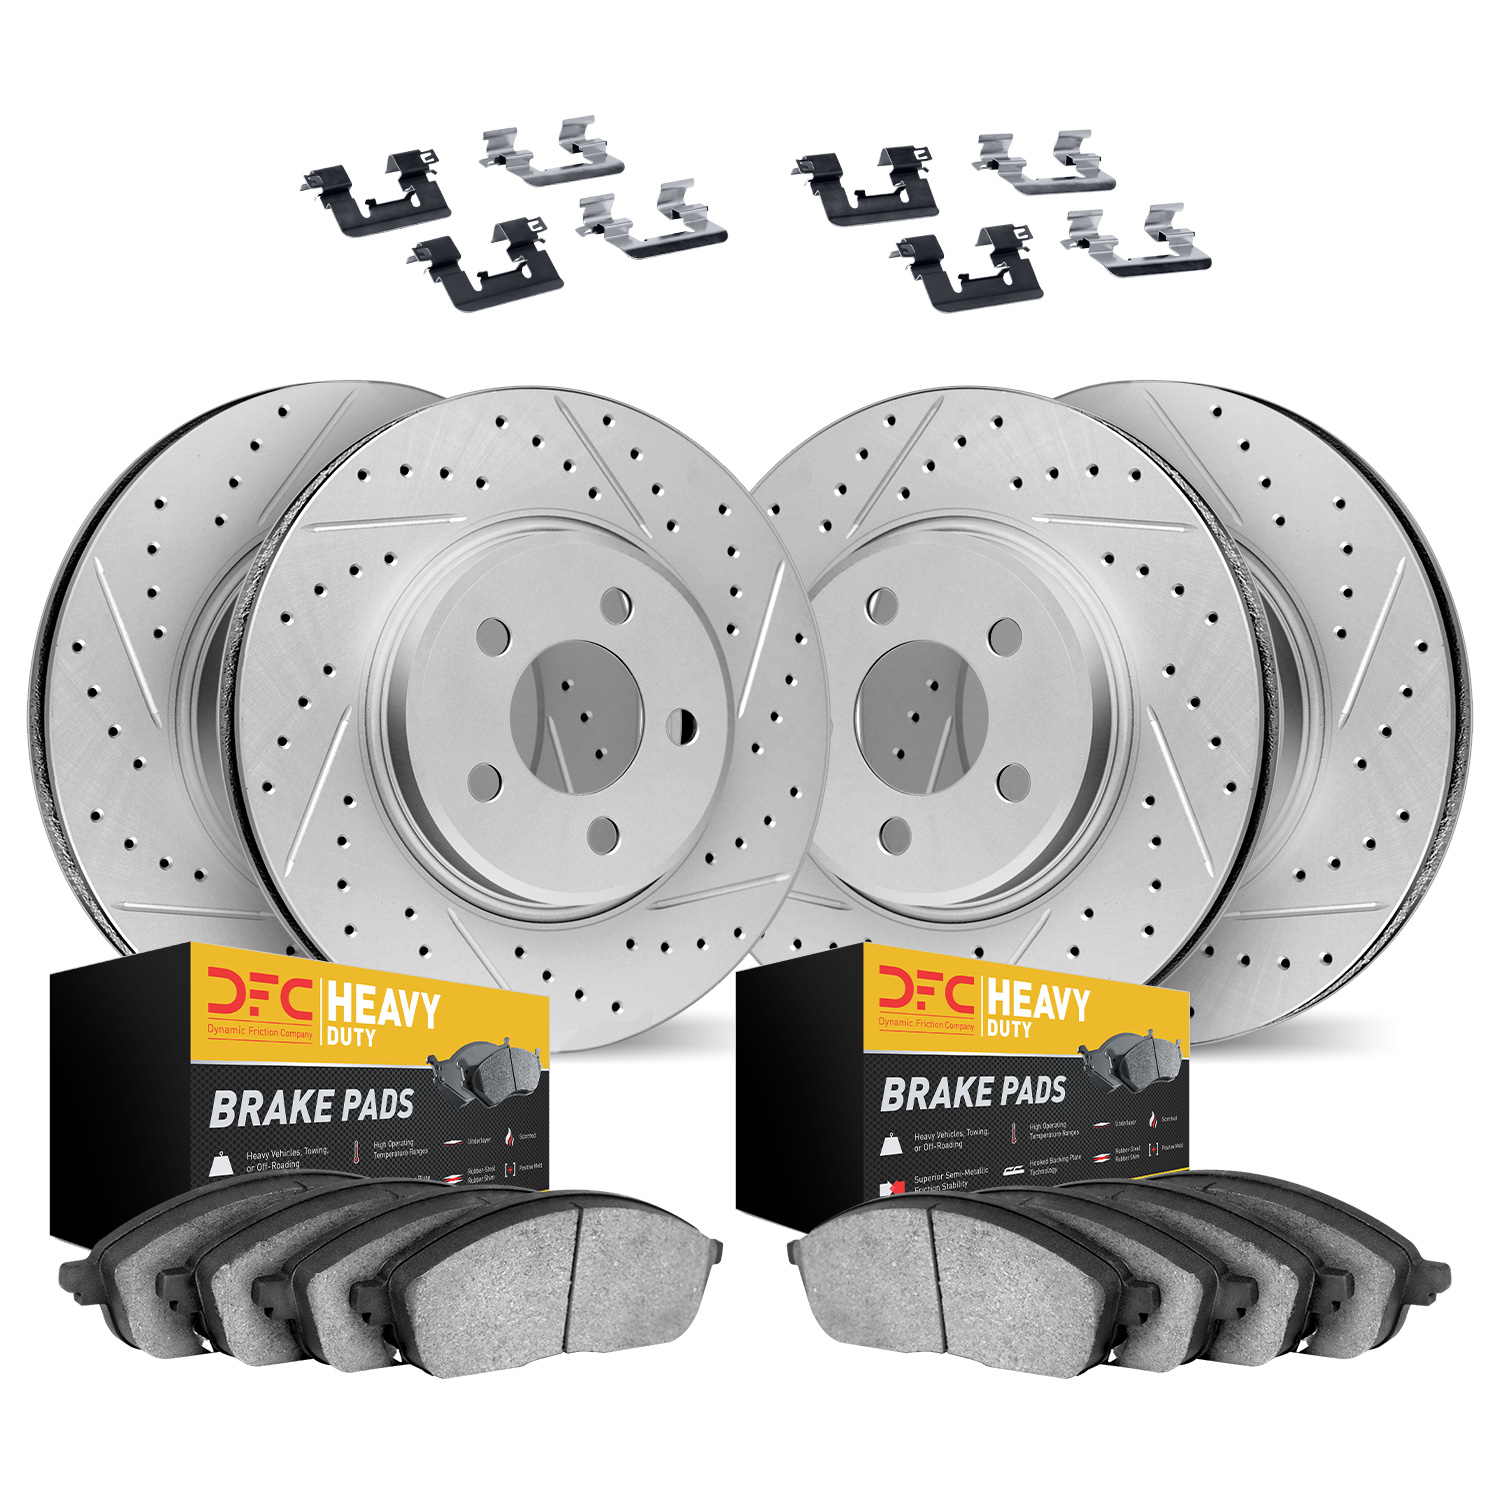 2214-99099 Geoperformance Drilled/Slotted Rotors w/Heavy-Duty Pads Kit & Hardware, 2013-2019 Ford/Lincoln/Mercury/Mazda, Positio